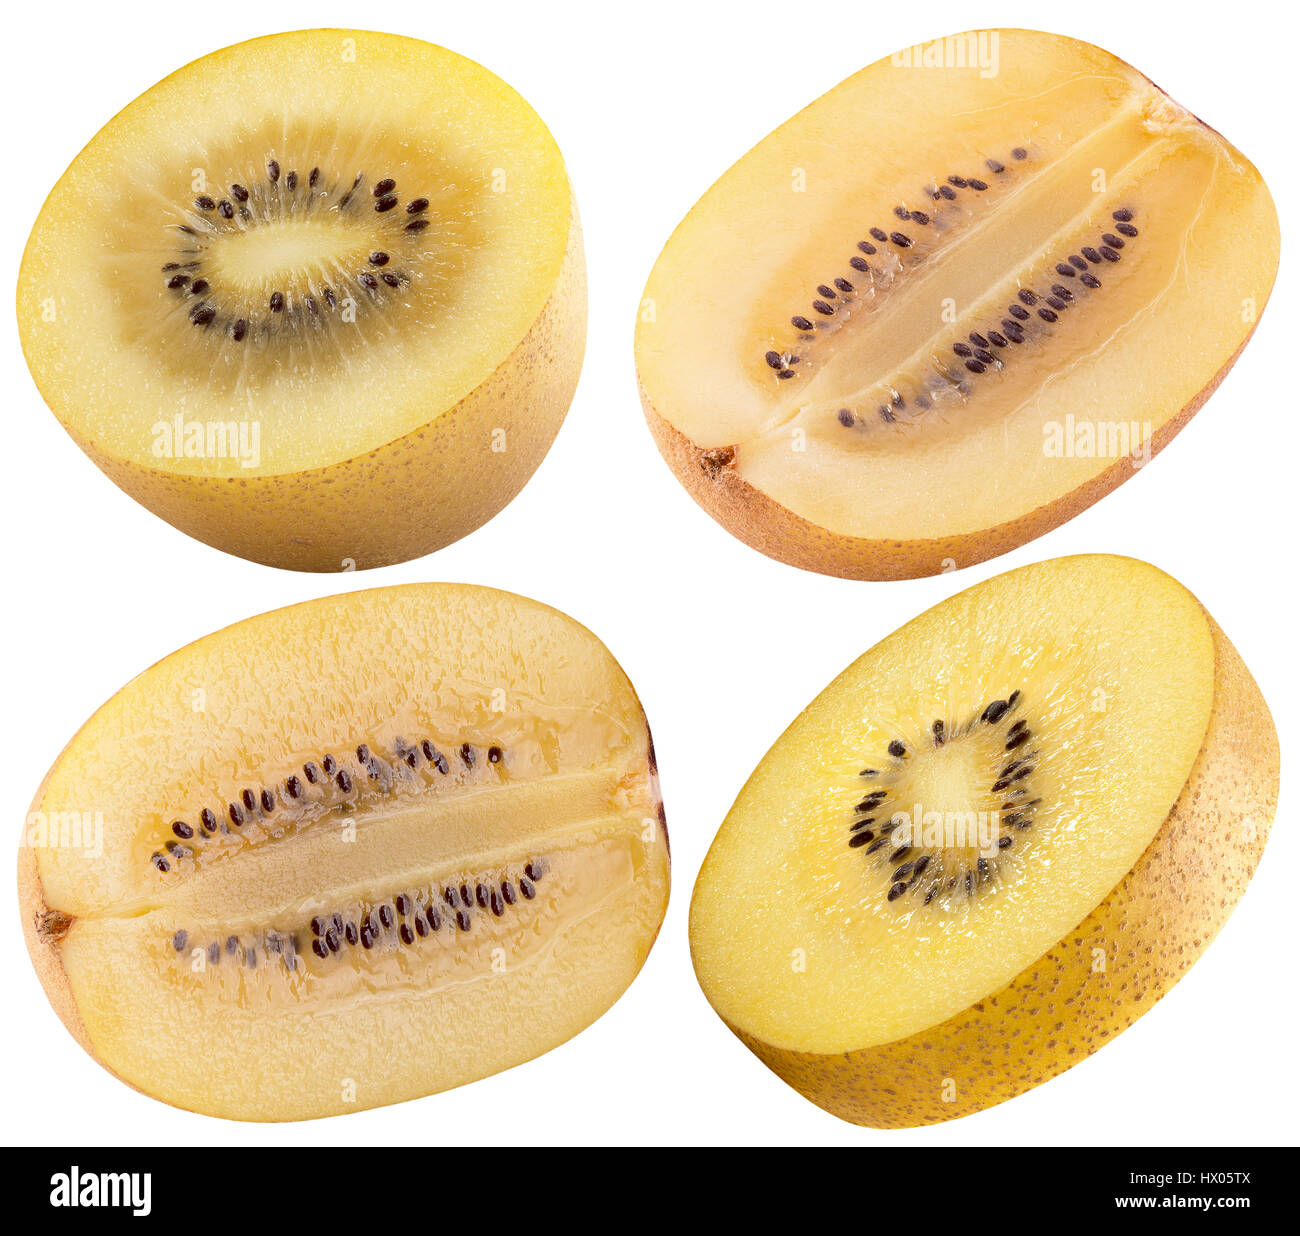 Kiwi - images Alamy and stock gold hi-res photography